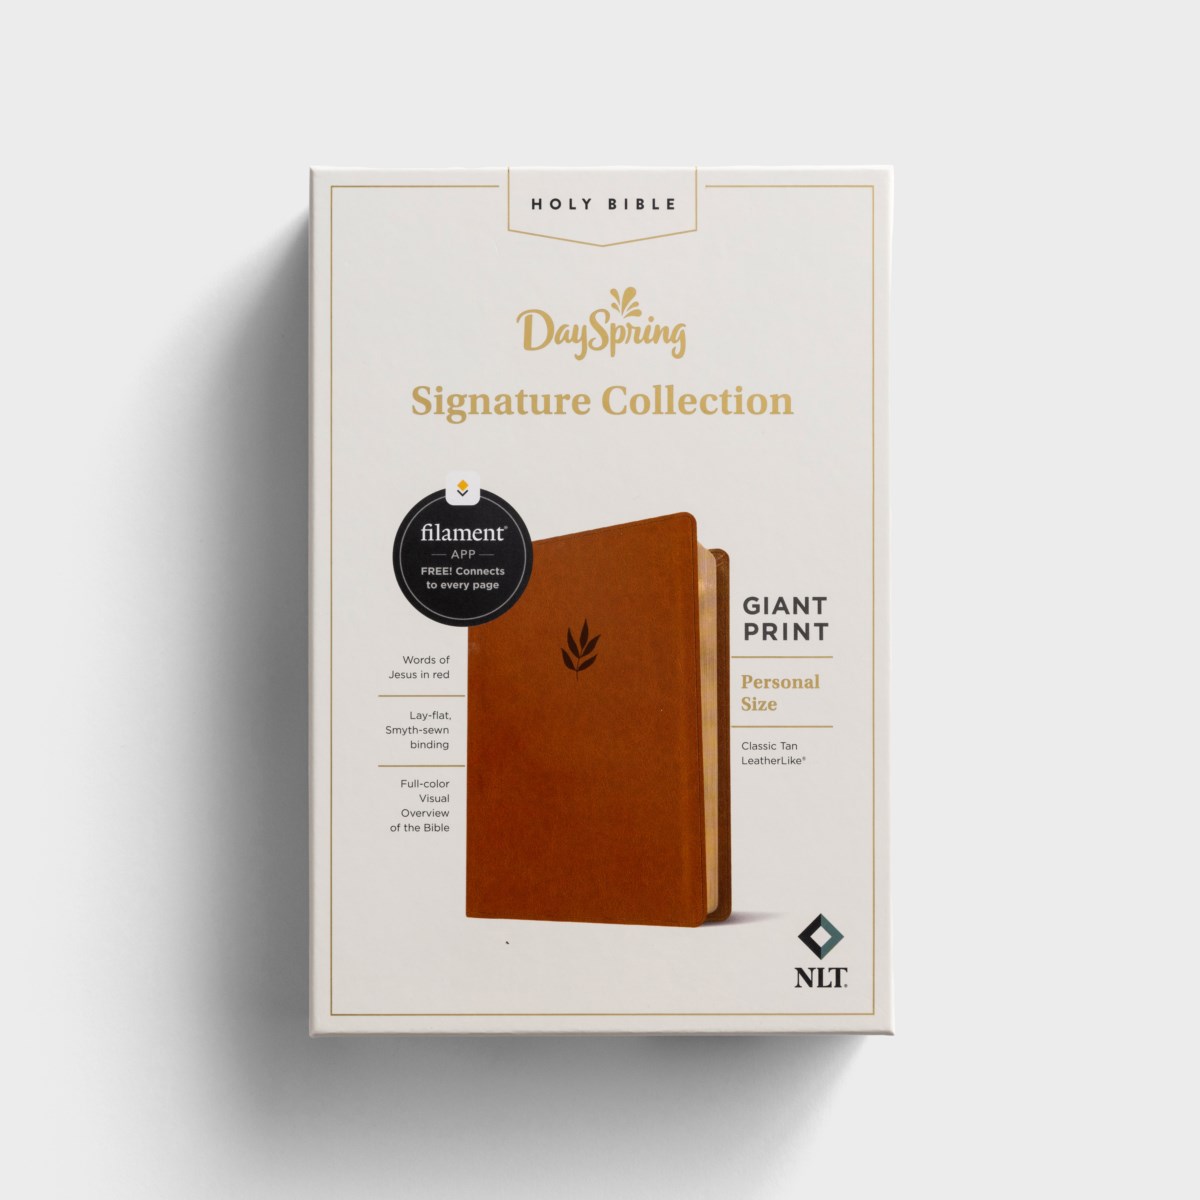 NLT - DaySpring Signature Collection - Personal Size Giant Print Bible - Tan LeatherLike - Filament Enabled